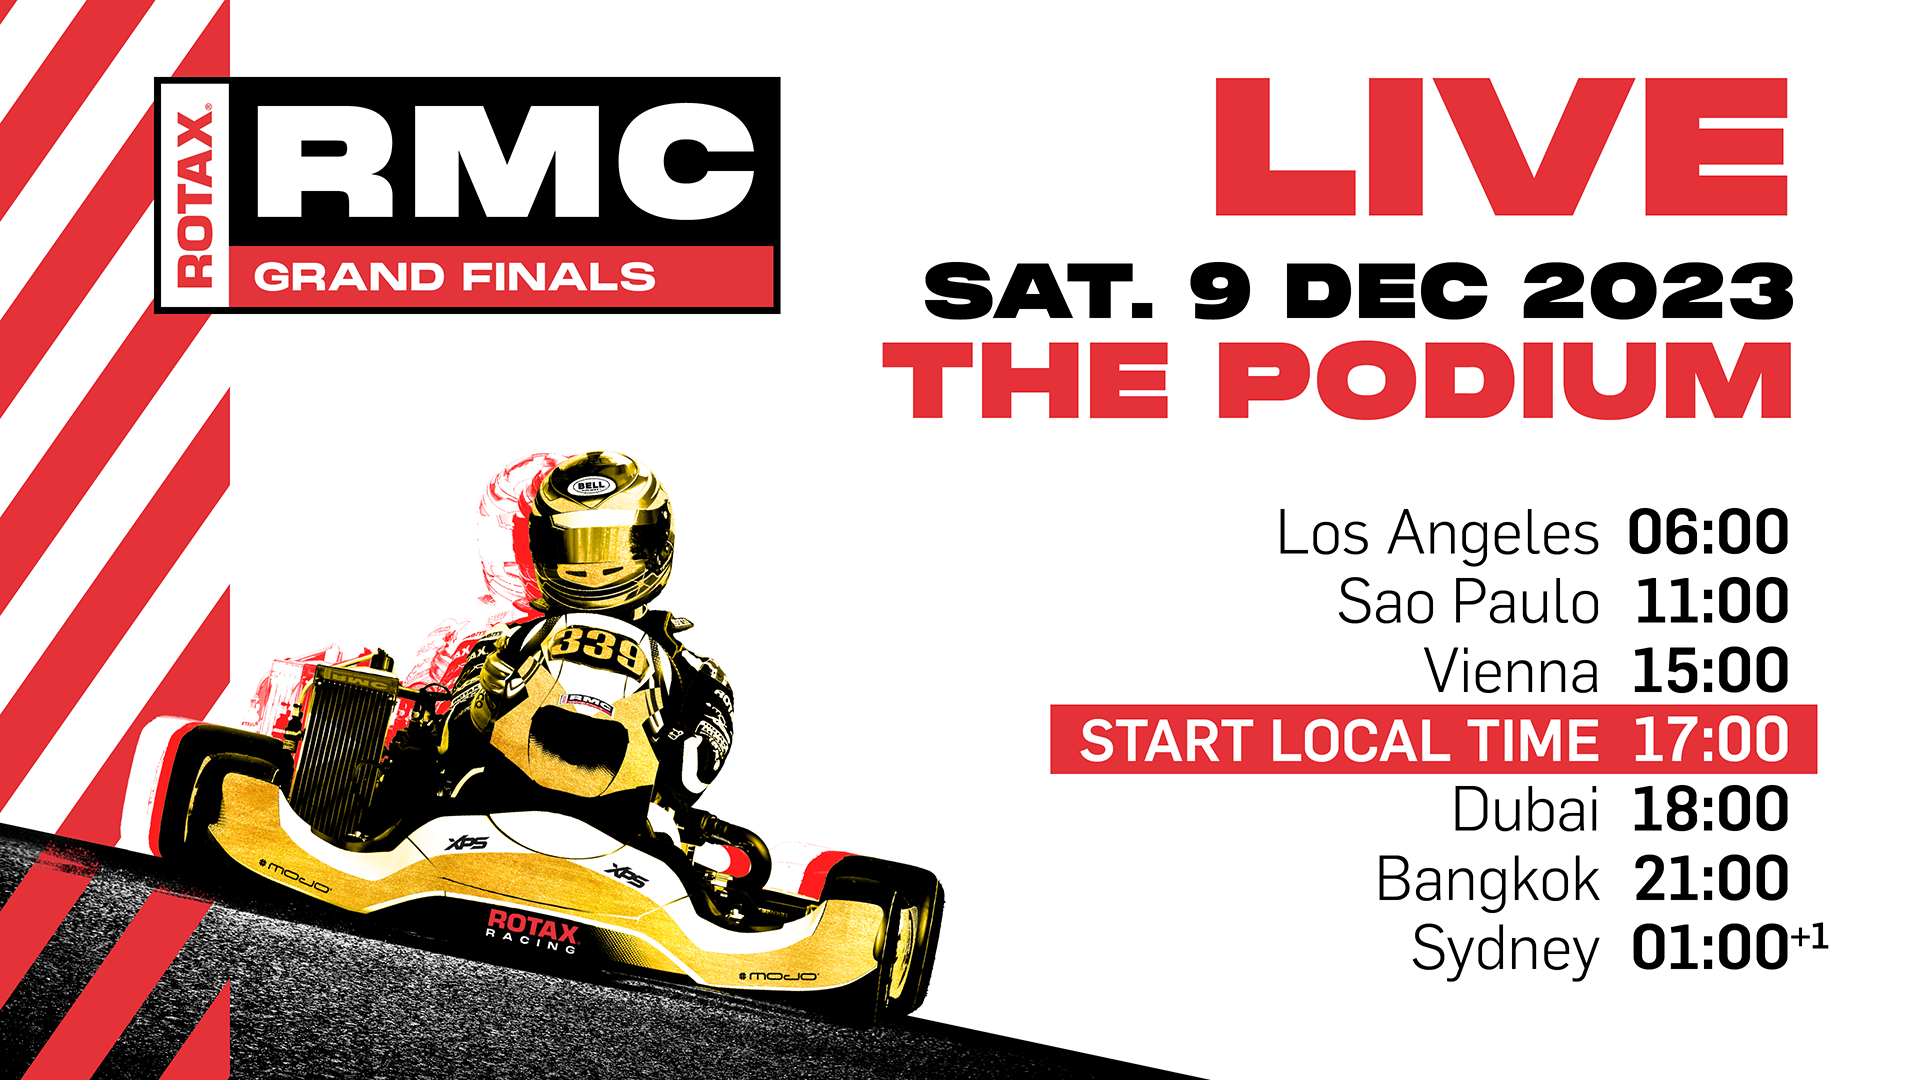 ROTAX RMCGF 2023 You Tube Channel PODIUM 1920x1080px